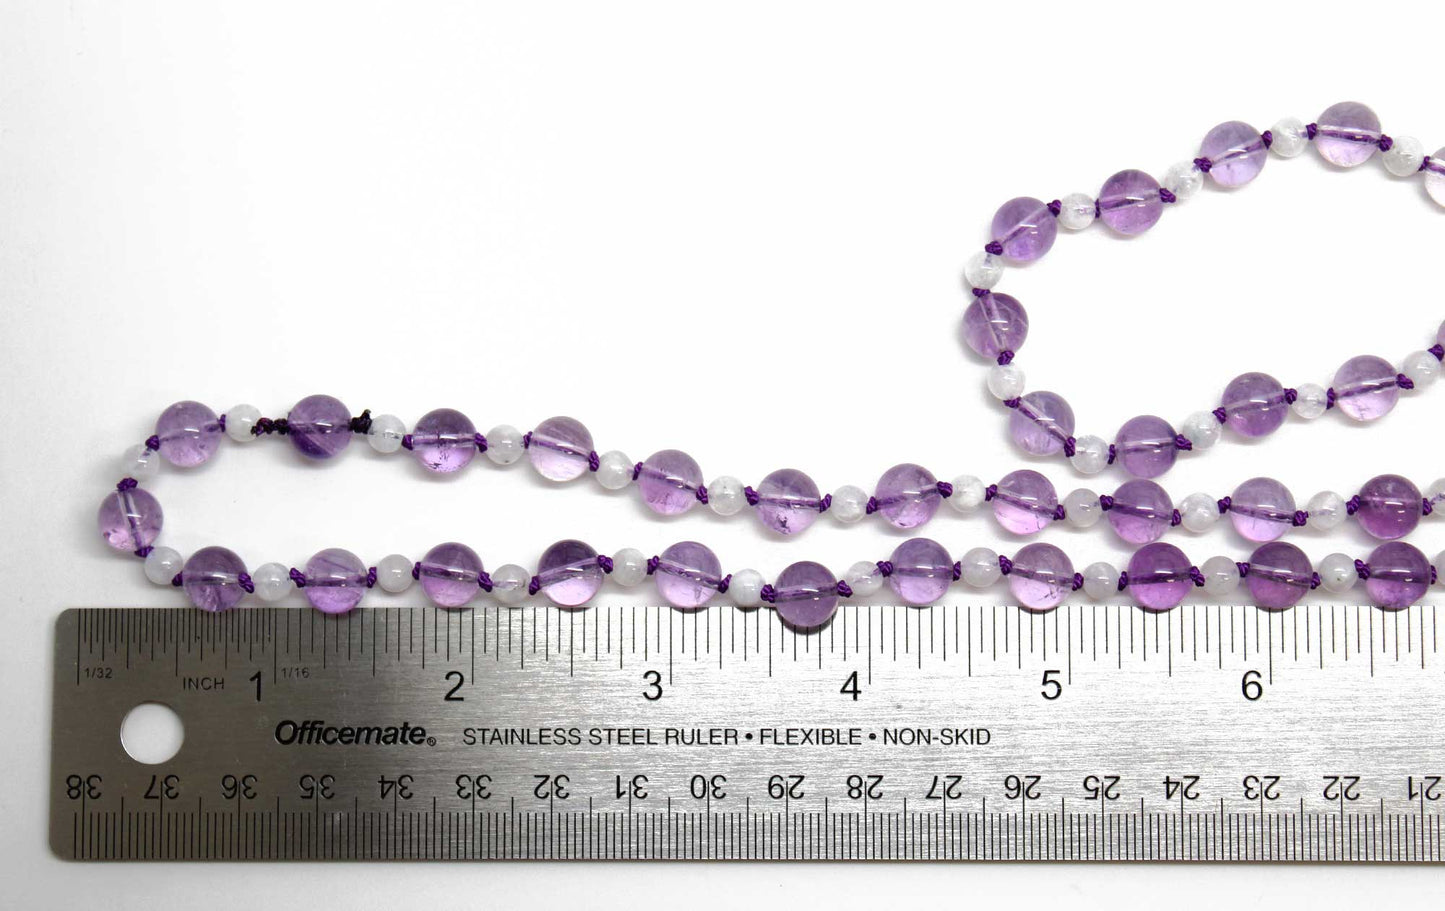 Hand Knotted Amethyst and Moonstone Bead Necklace, 35 Inch Long